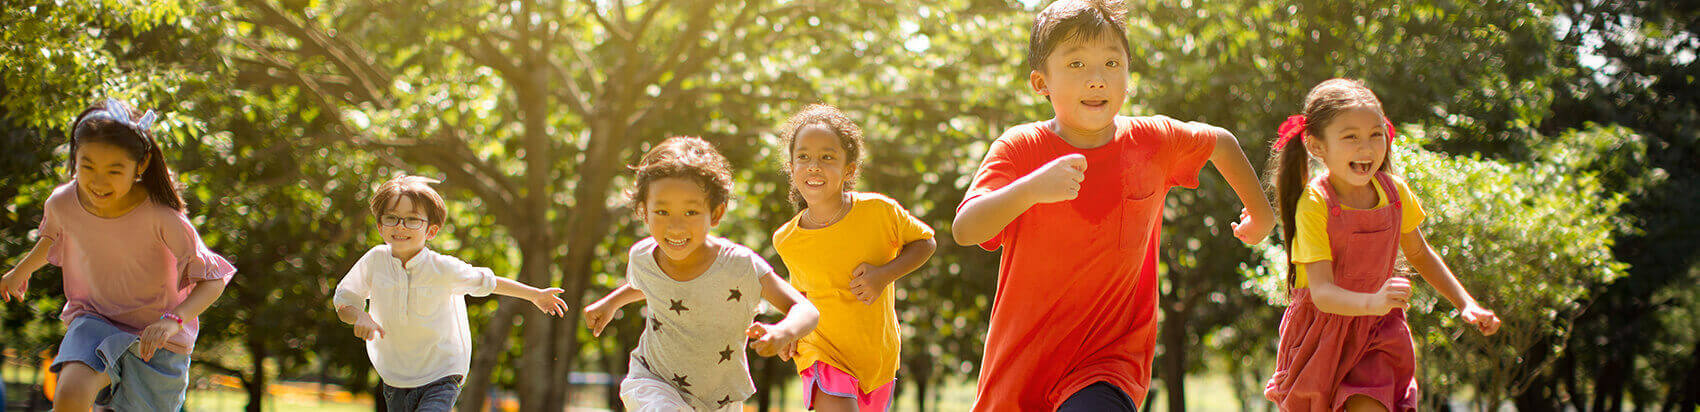 group of happy, smiling children running outside together